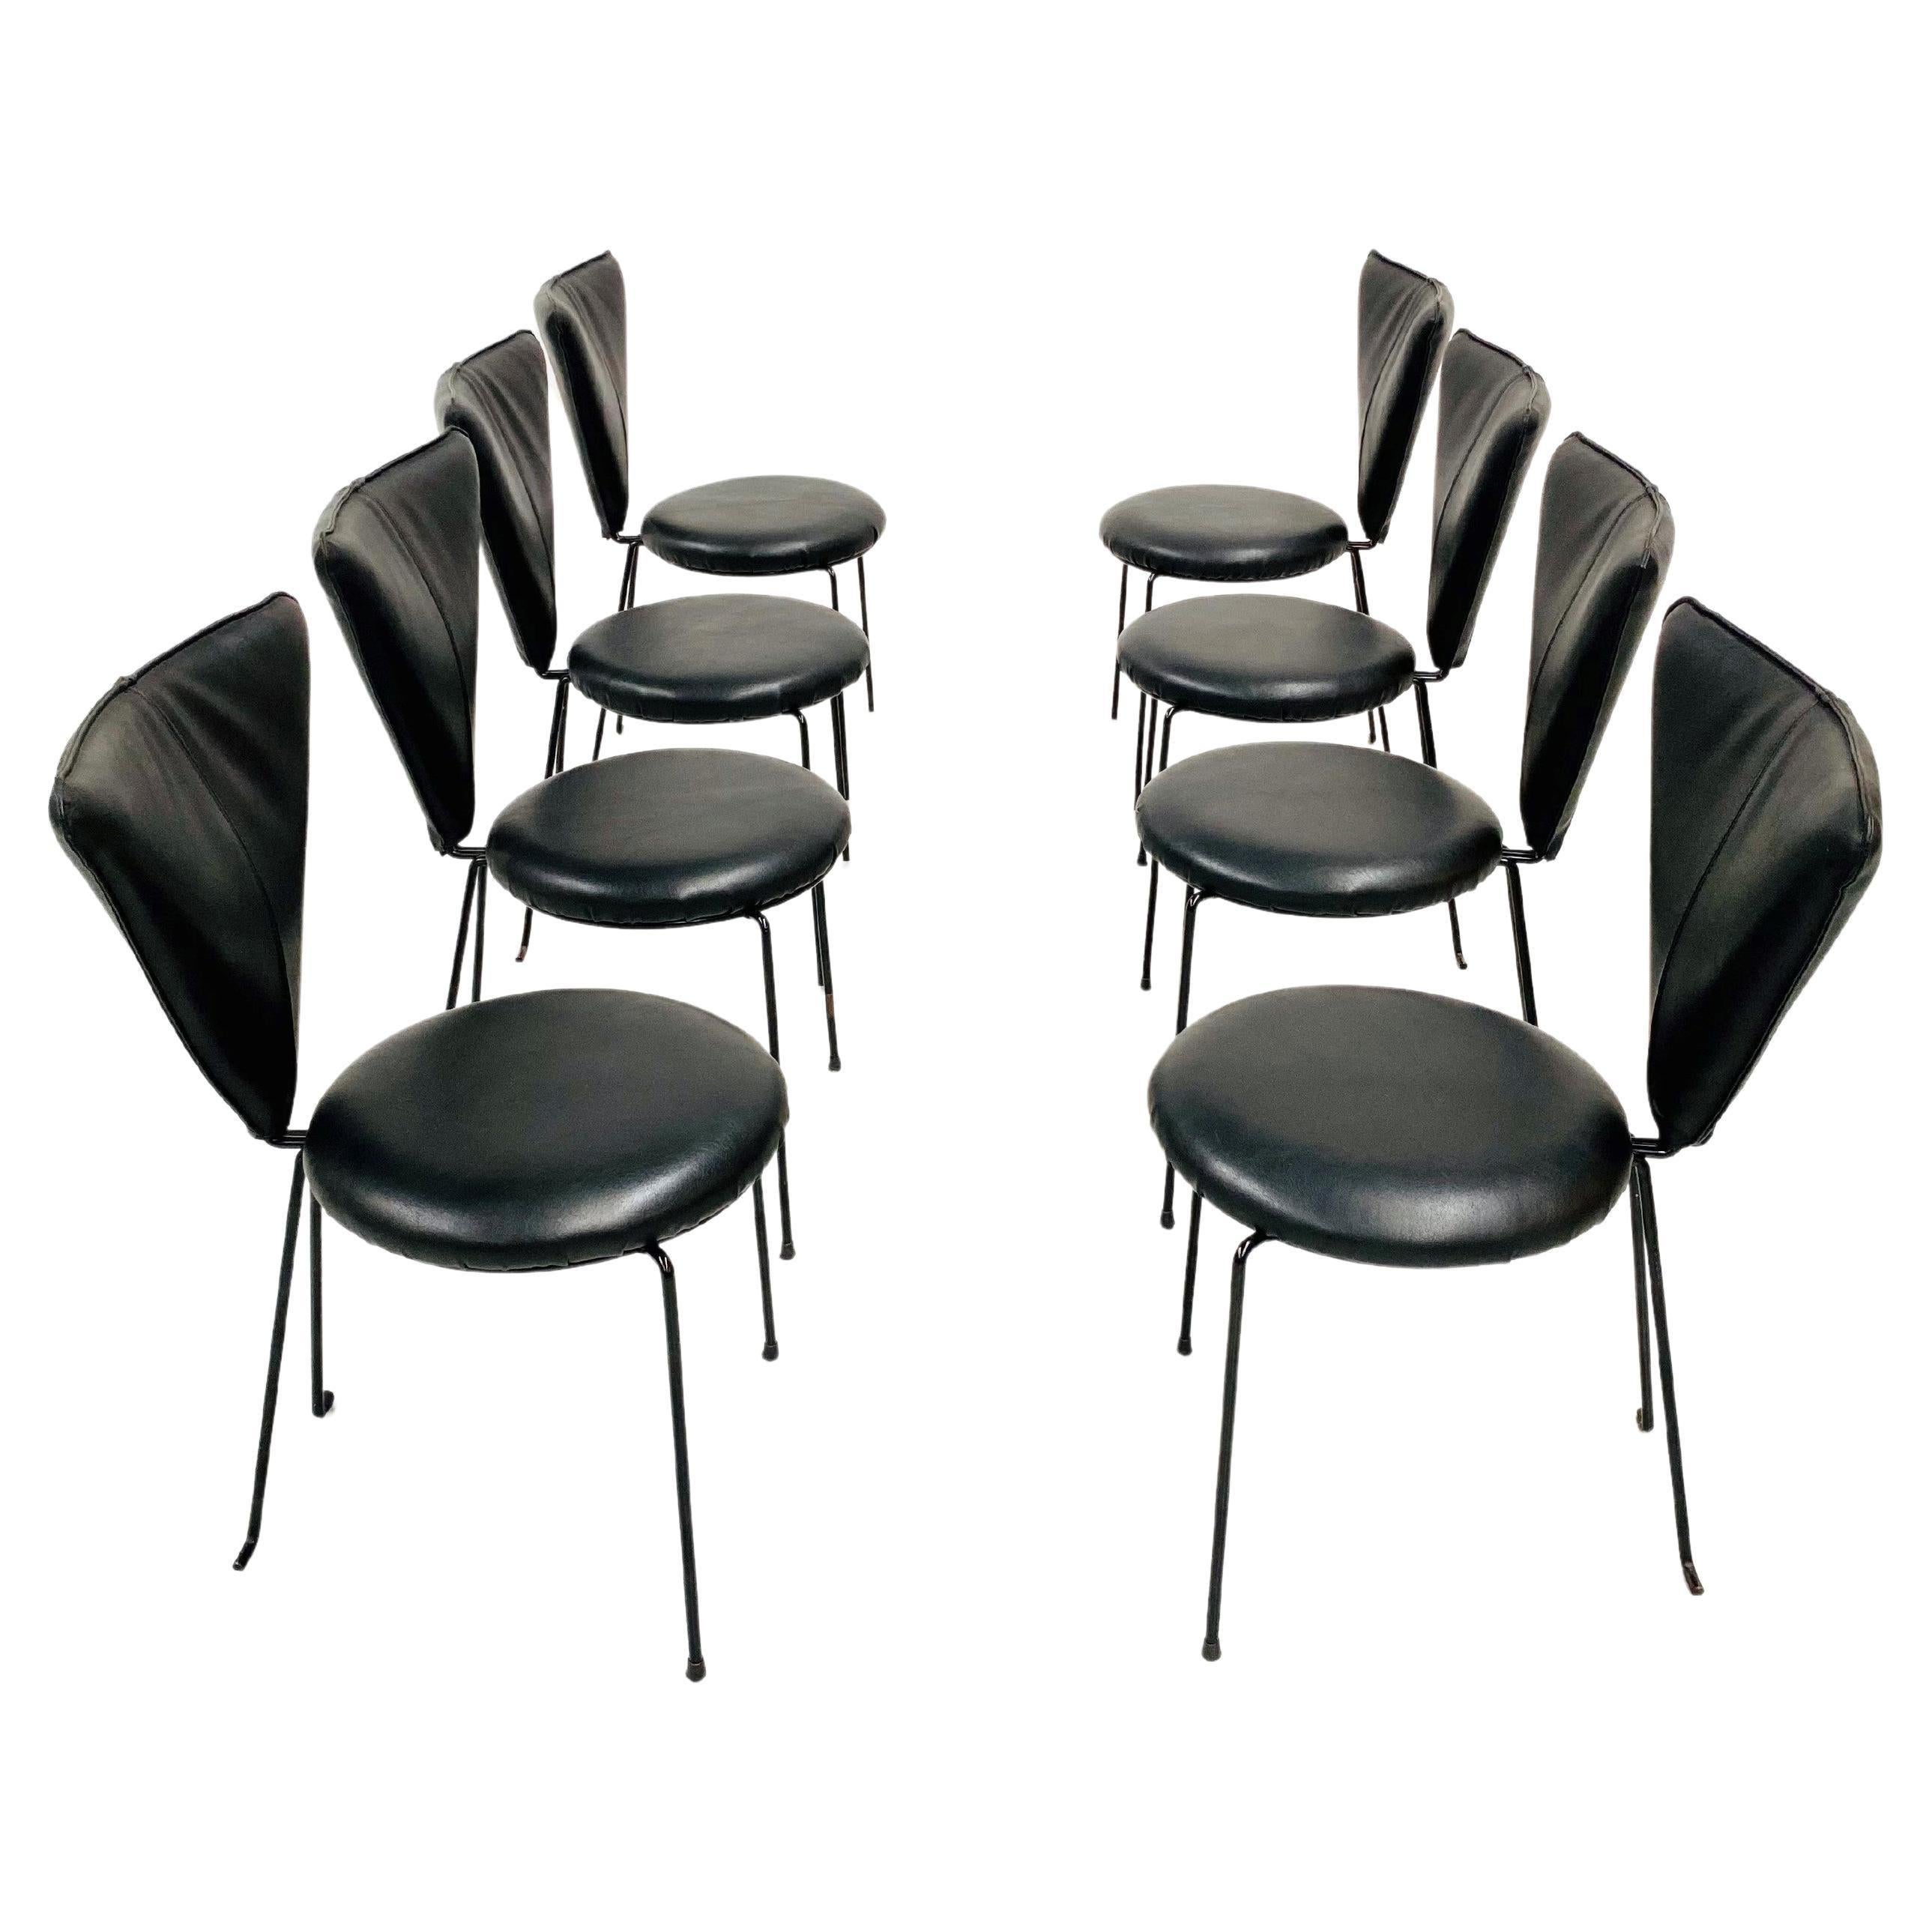 These 8 chairs were designed and manufactured by Helmut Lübke in the eighties. Each chair has its own serial number and the Lübke logo under the seat.
Helmut Lübke was also the founder of the upholsterered furniture manufacturer COR. The company